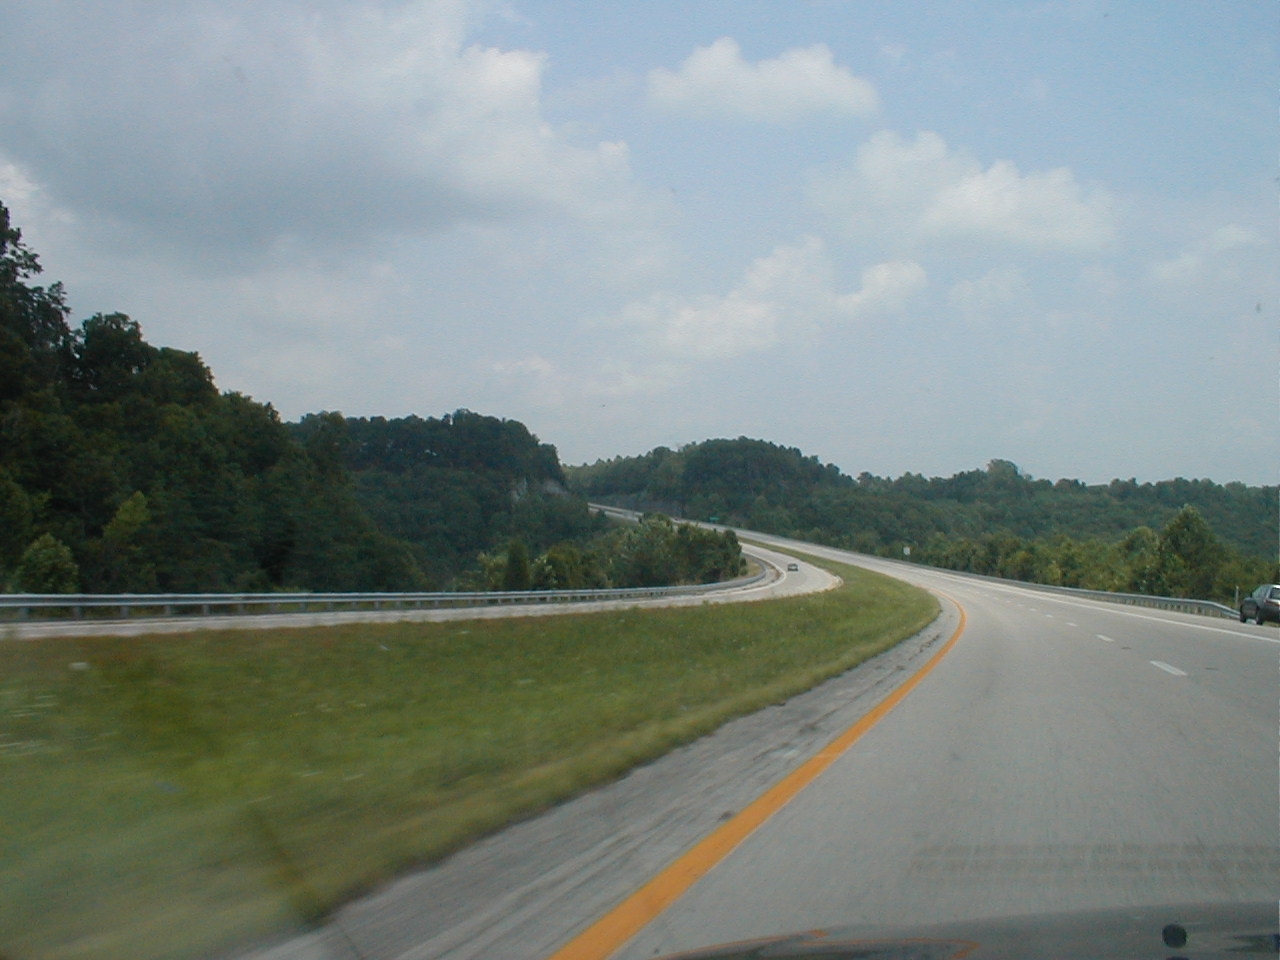 Typical section of the parkway.